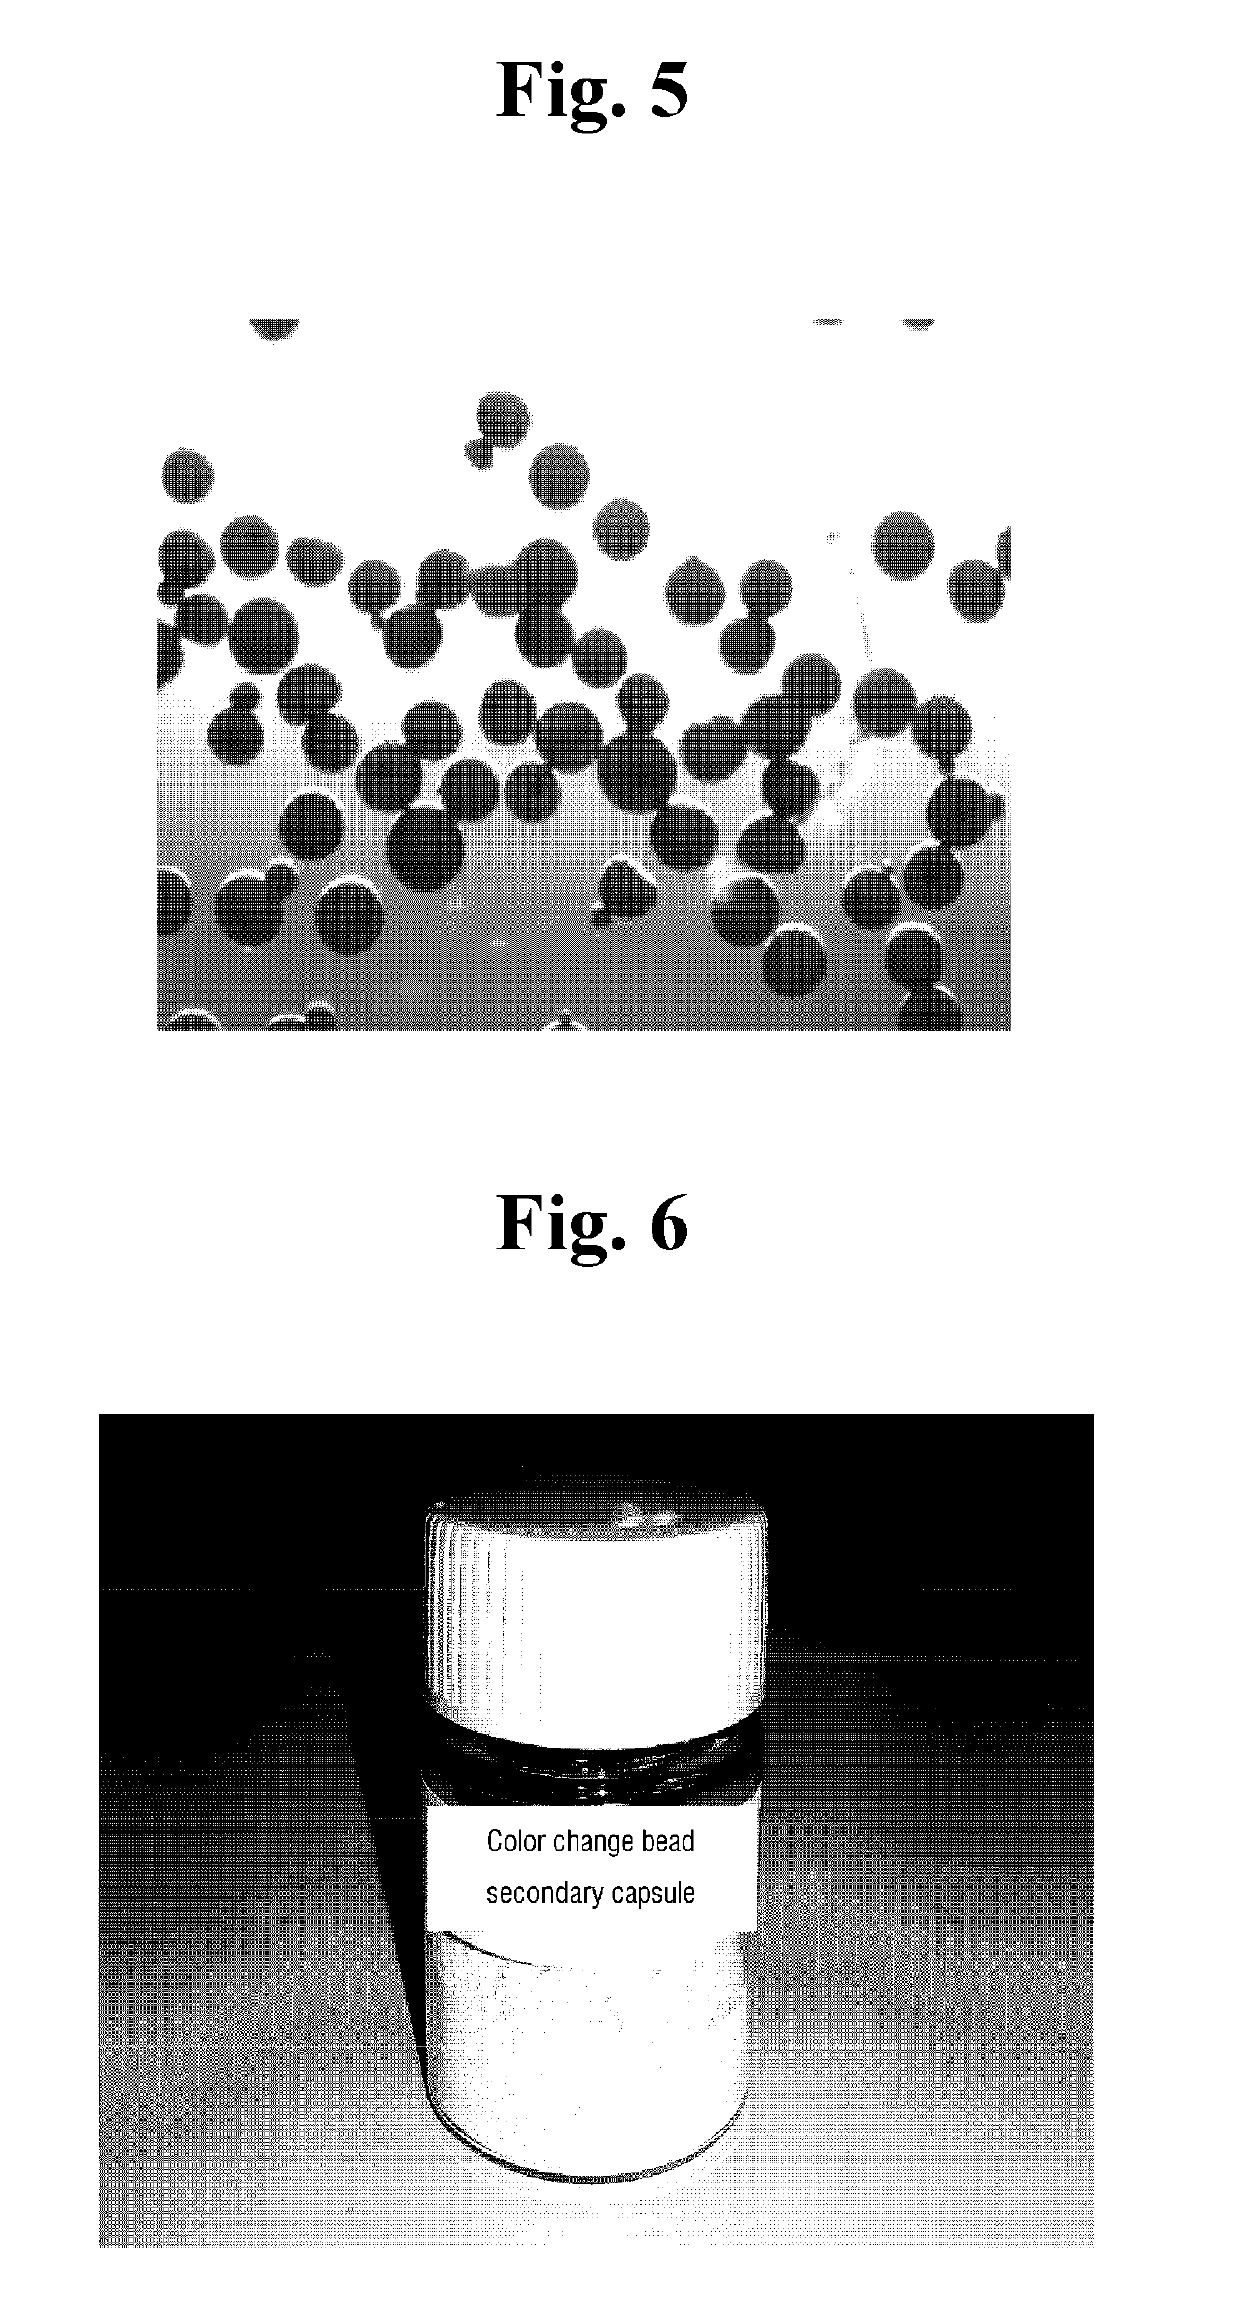 Multi-capsule containing pigment for cosmetic material or functional component, and method for producing same